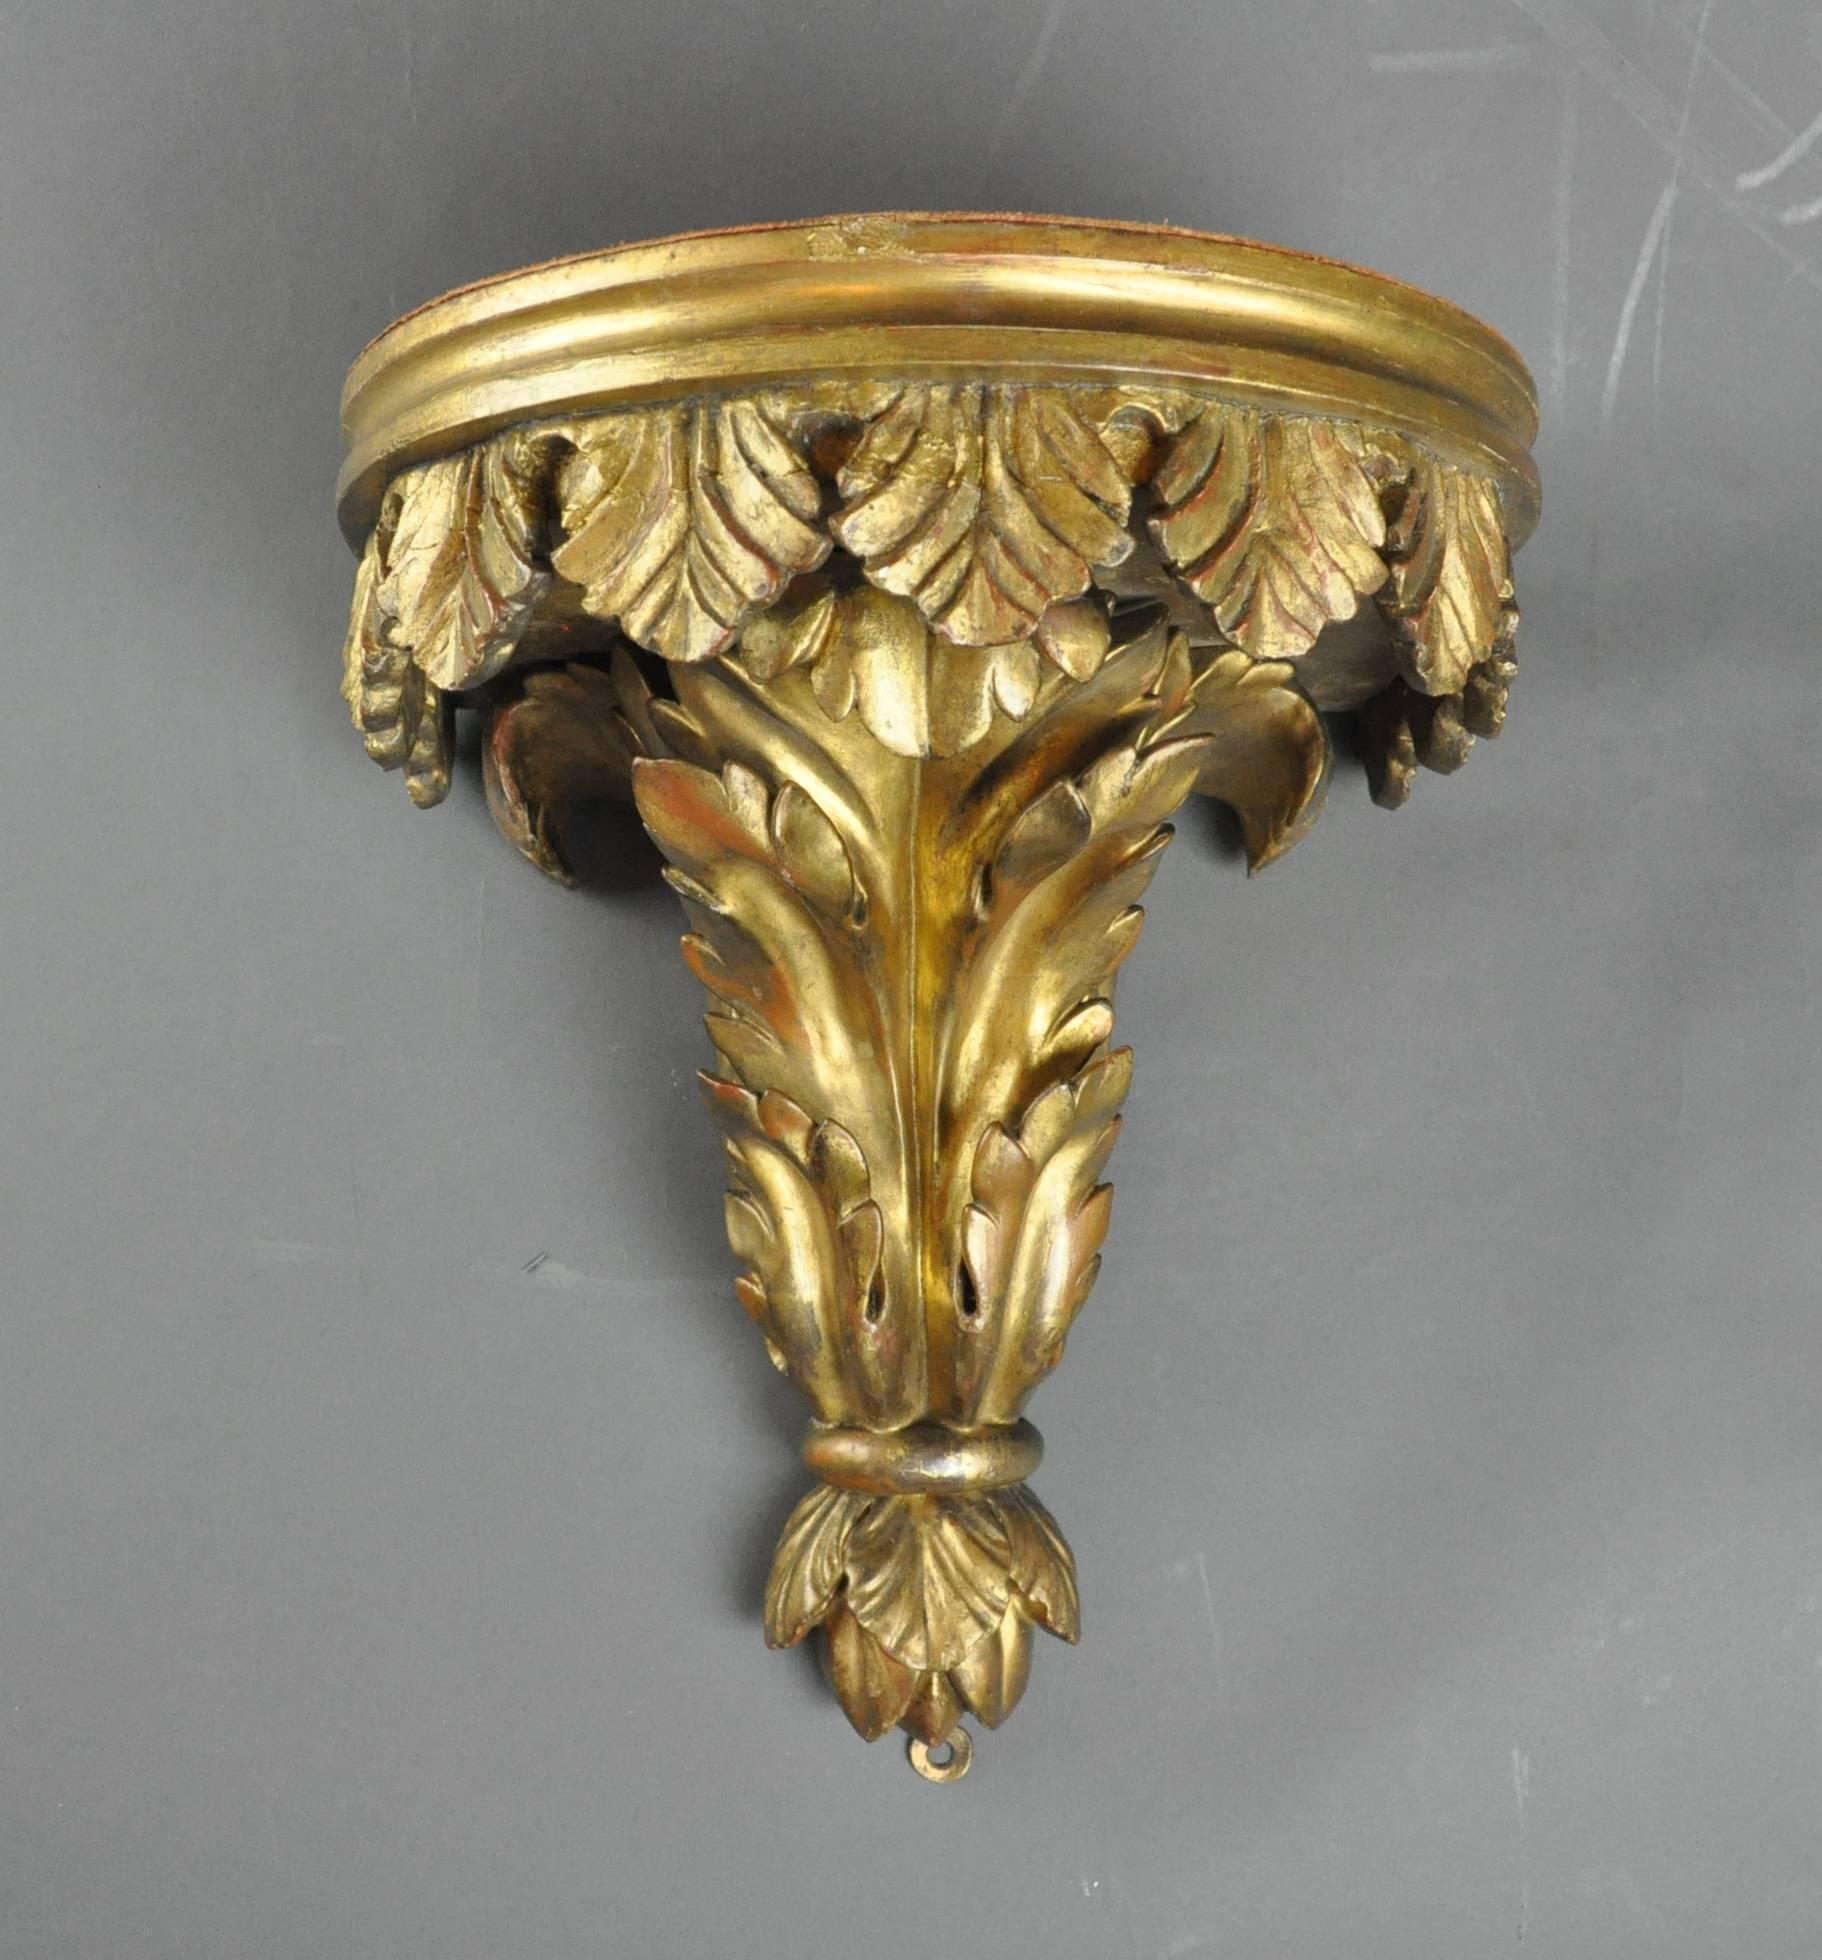 A good quality late 18th-early 19th century carved and gilded wall bracket.